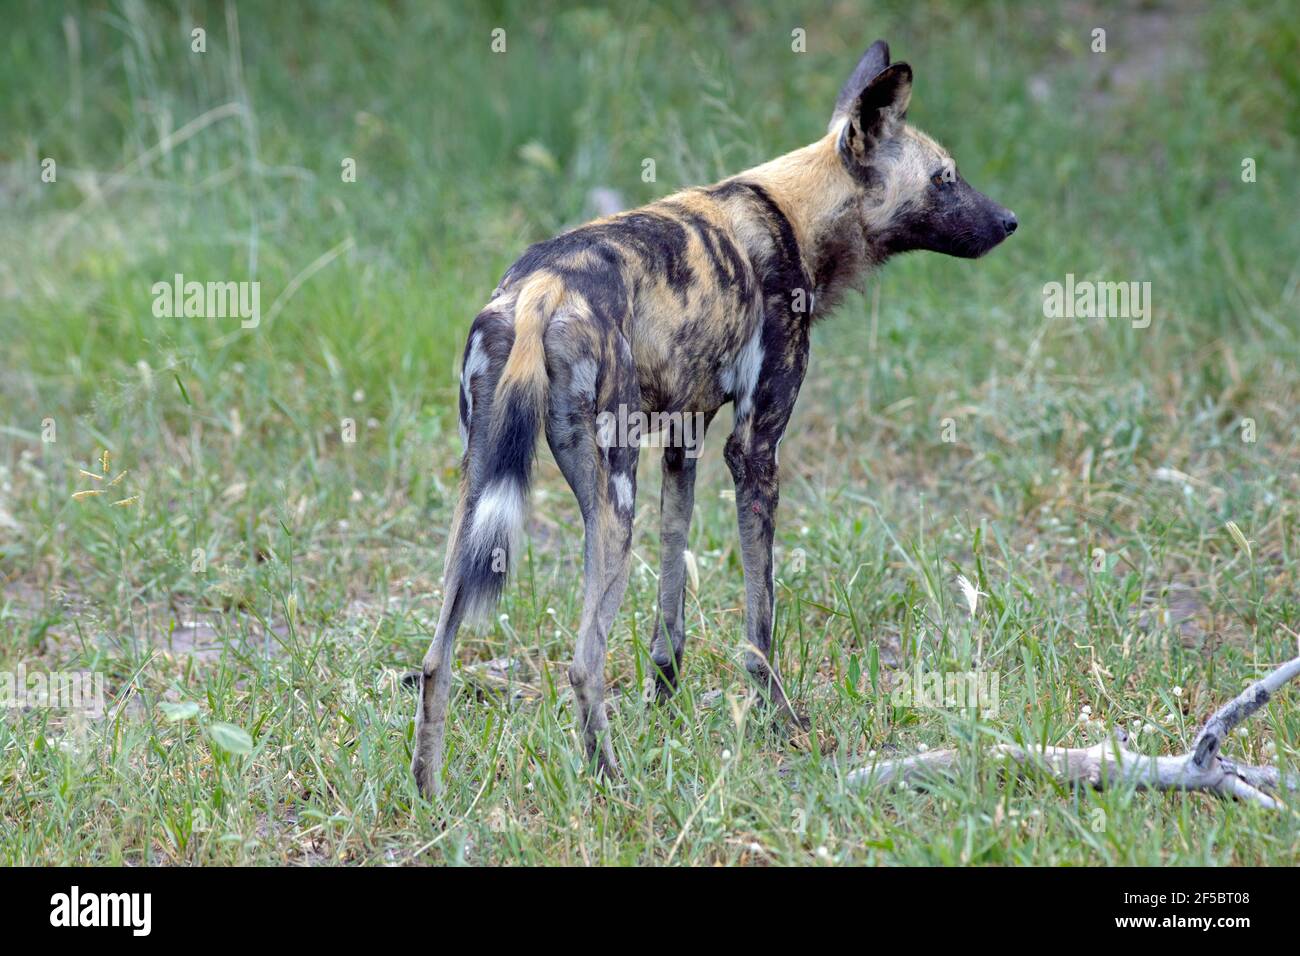 African Wild Hunting Dog or Painted Wolf  (Lycaon pictus). Rear view. Standing. Note banded tail.. Tri-coloured fur coat, or pelage.Botswana. Stock Photo